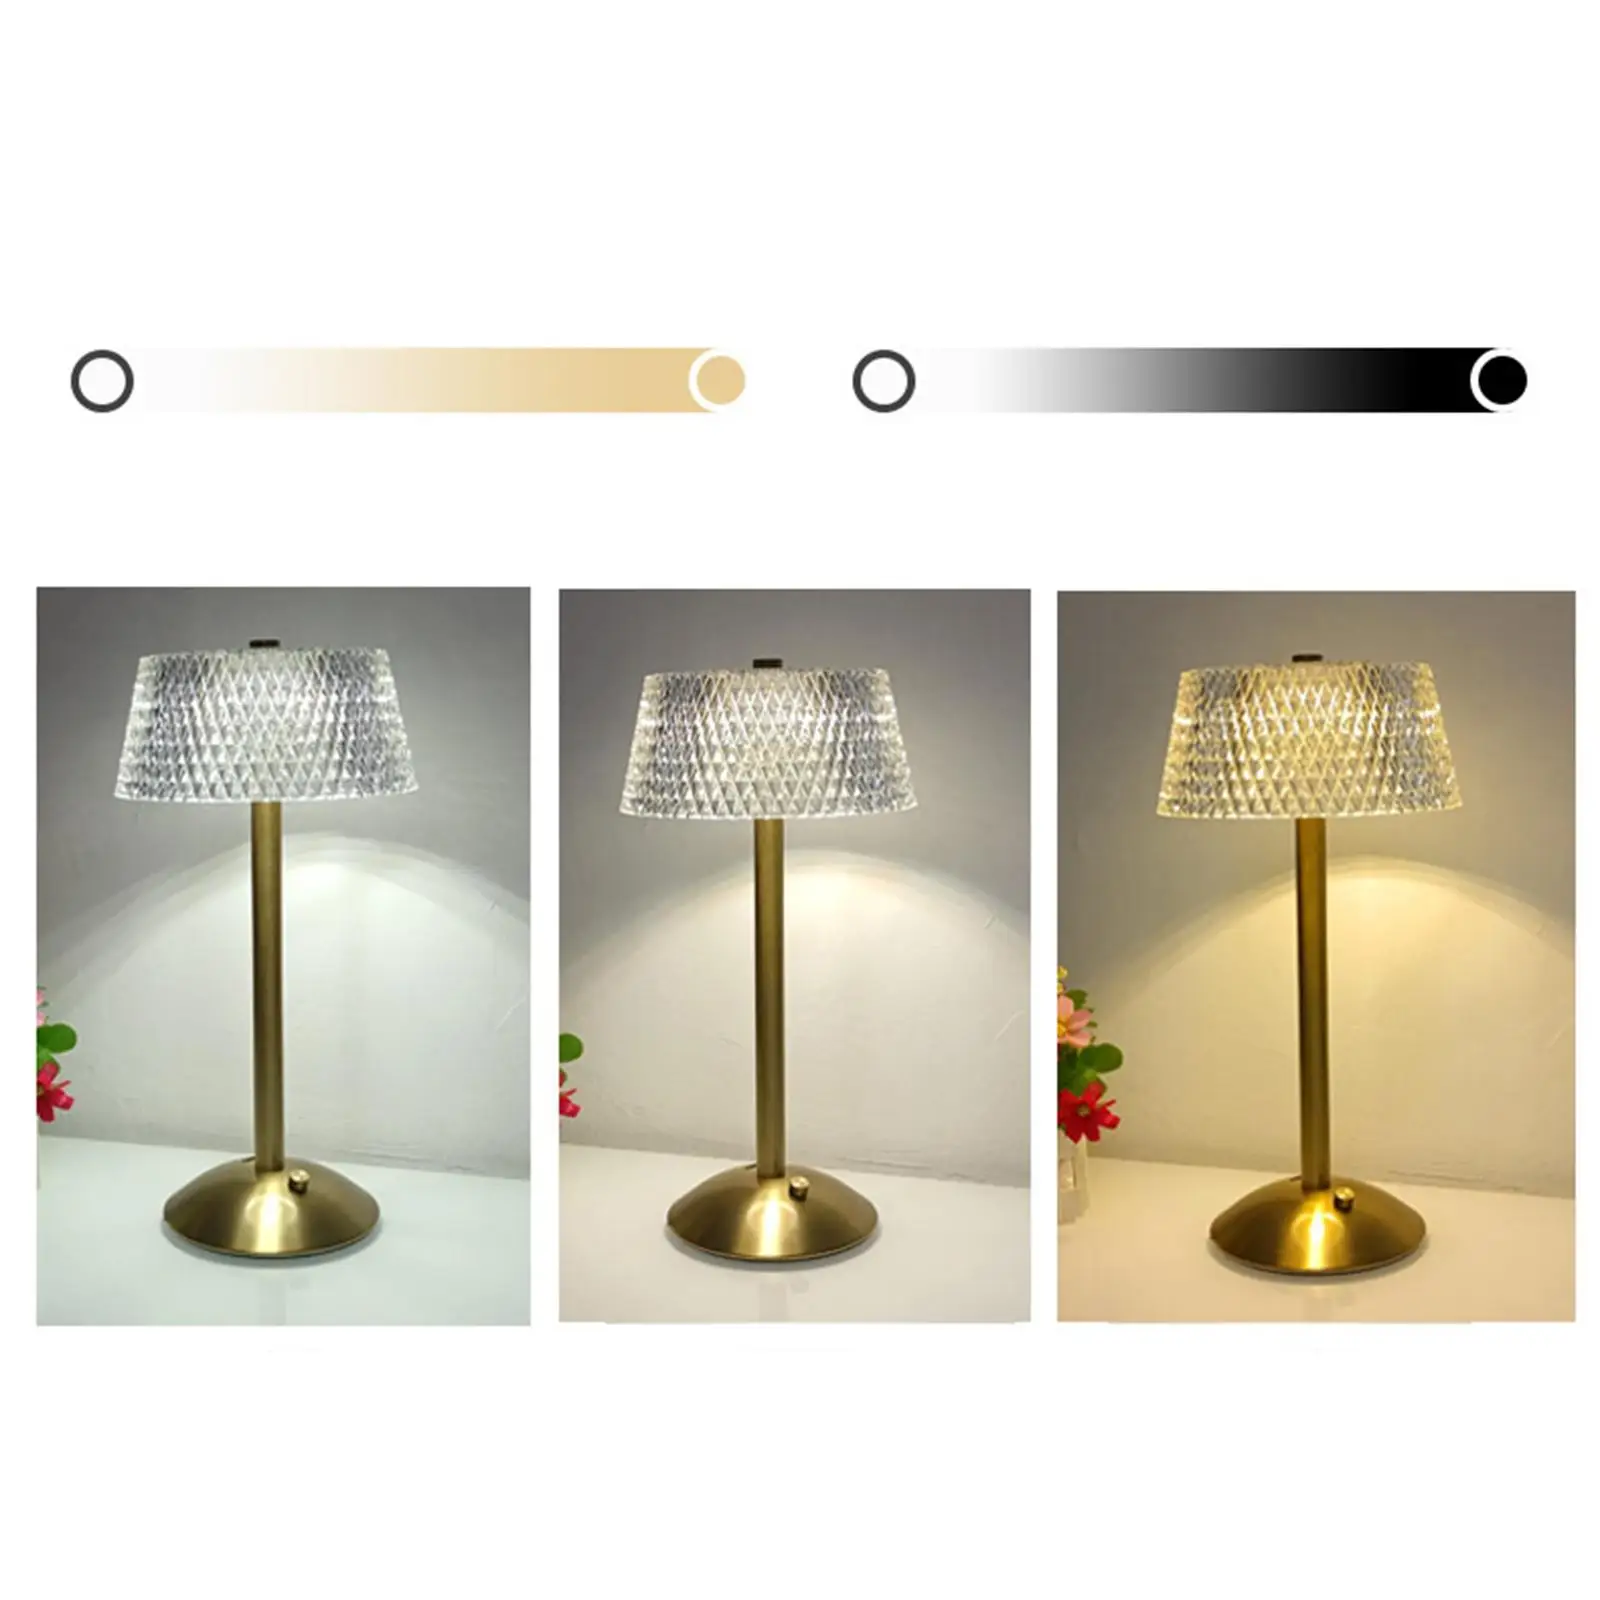 LED  Table Lamp Light Adjustable Light Luxury Energy Saving Rechargeable  for Bedroom Desk NightStand Office Reading